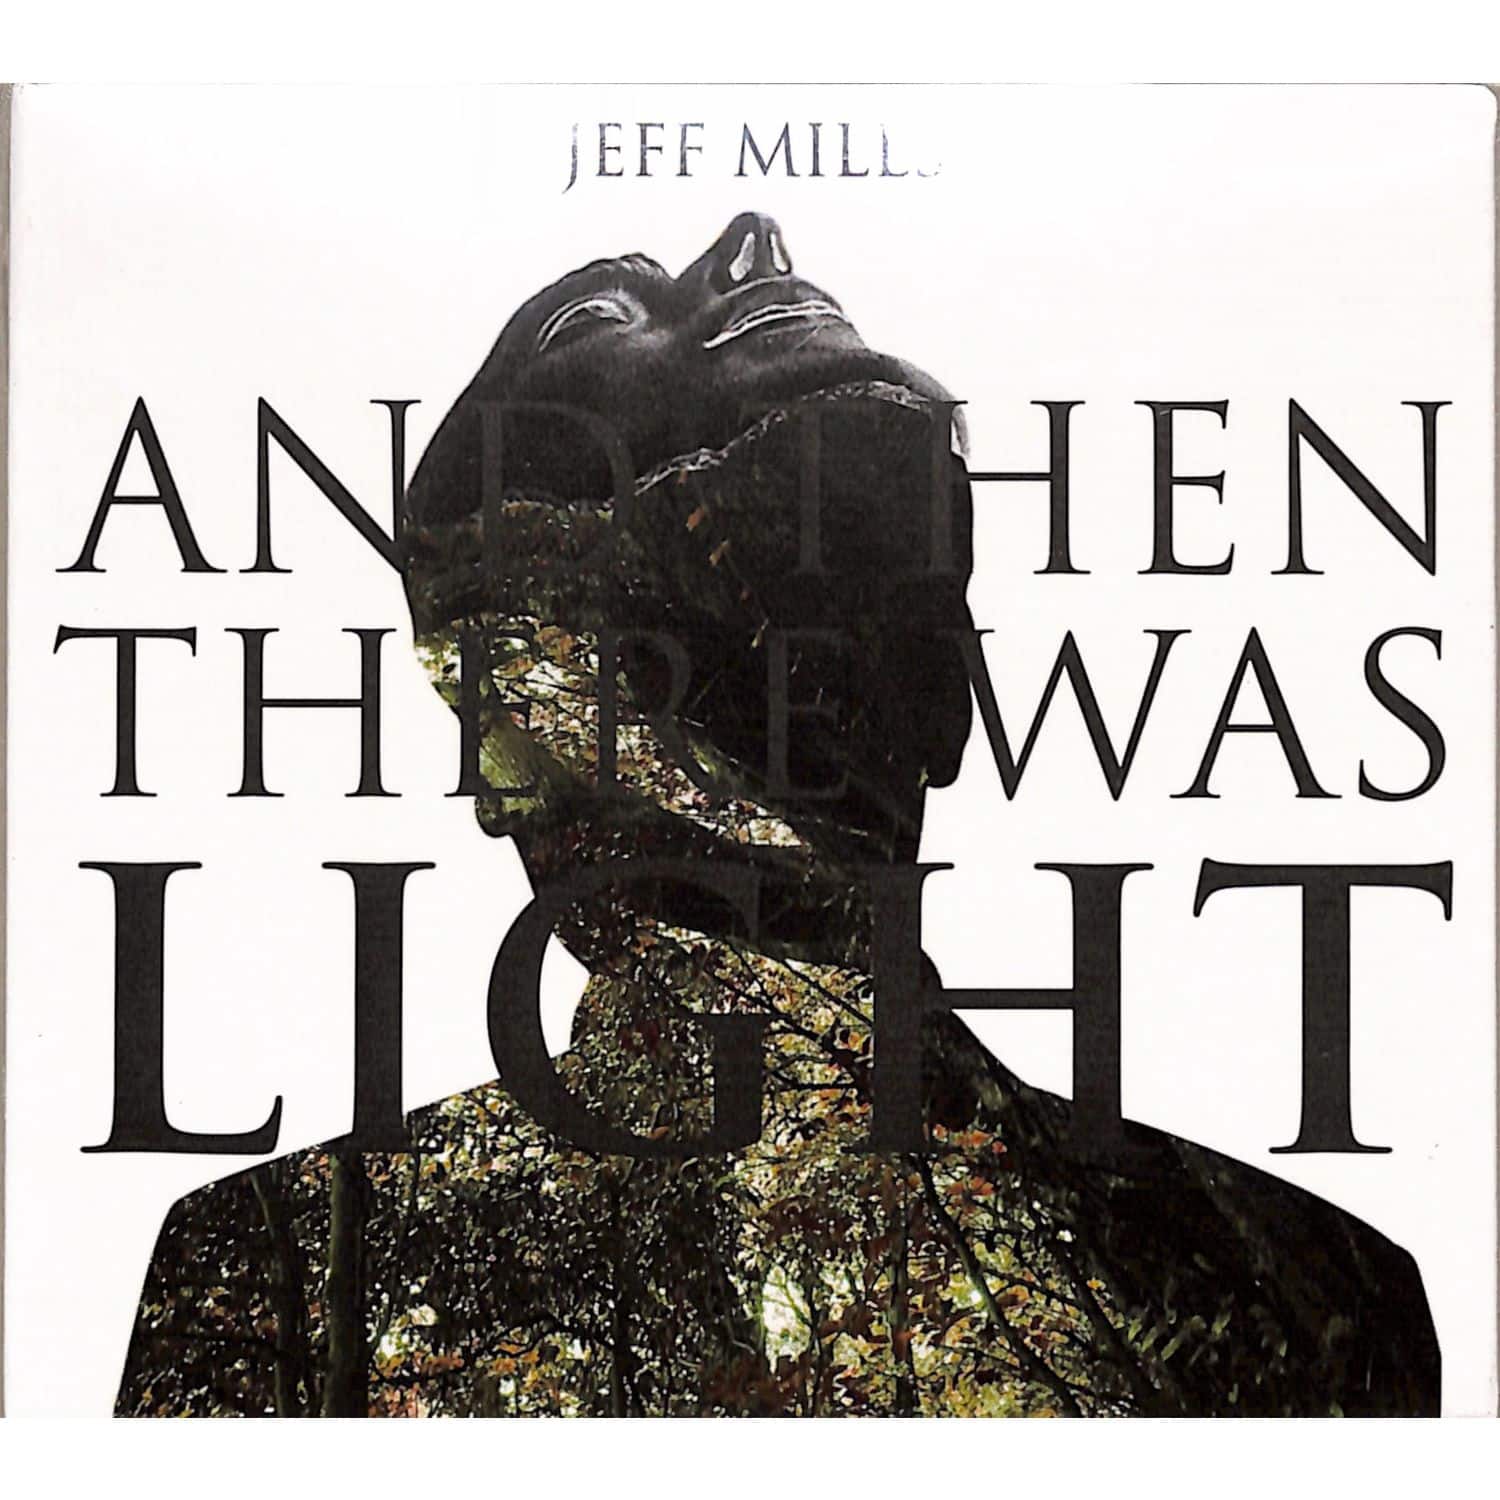 Jeff Mills - AND THEN THERE WAS LIGHT 